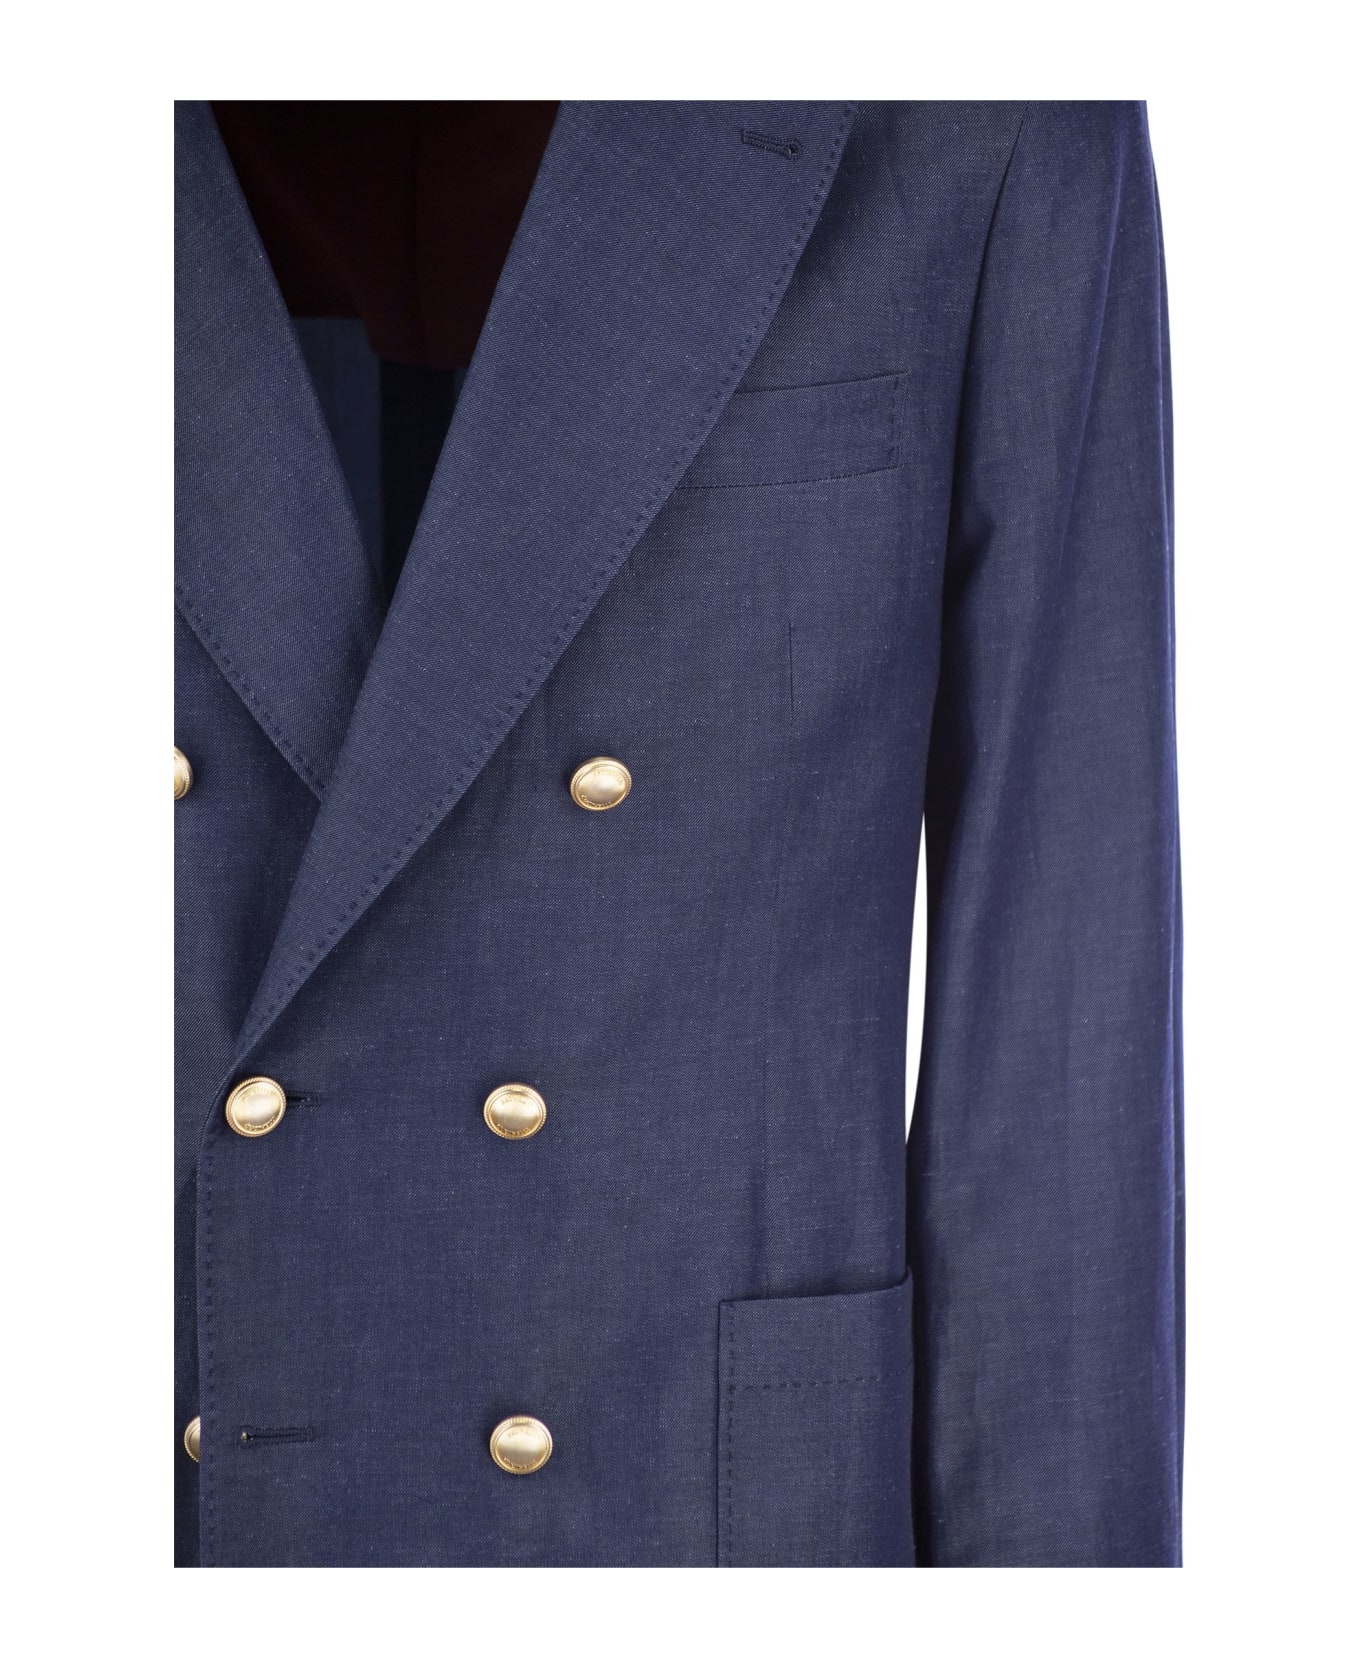 Brunello Cucinelli Double-breasted Jacket - Blue スーツ